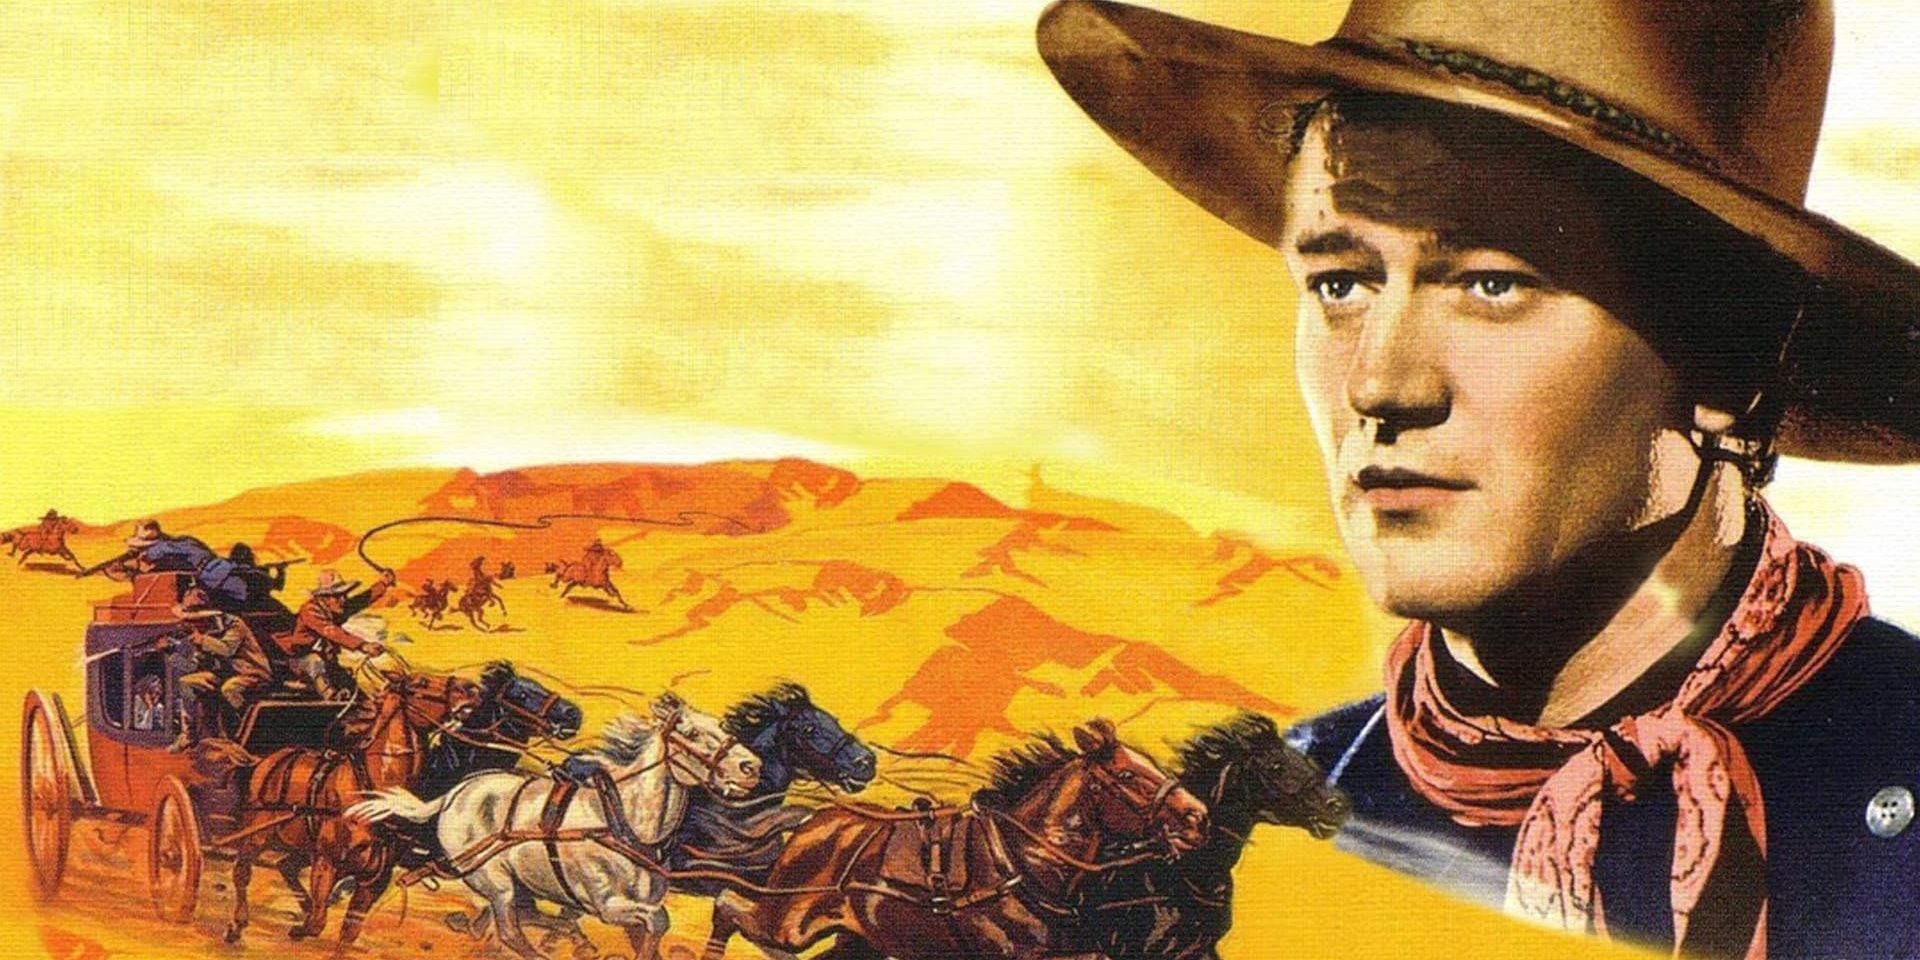 Poster for 1939's Stagecoach featuring John Wayne as the Ringo Kid and running carriage horses 